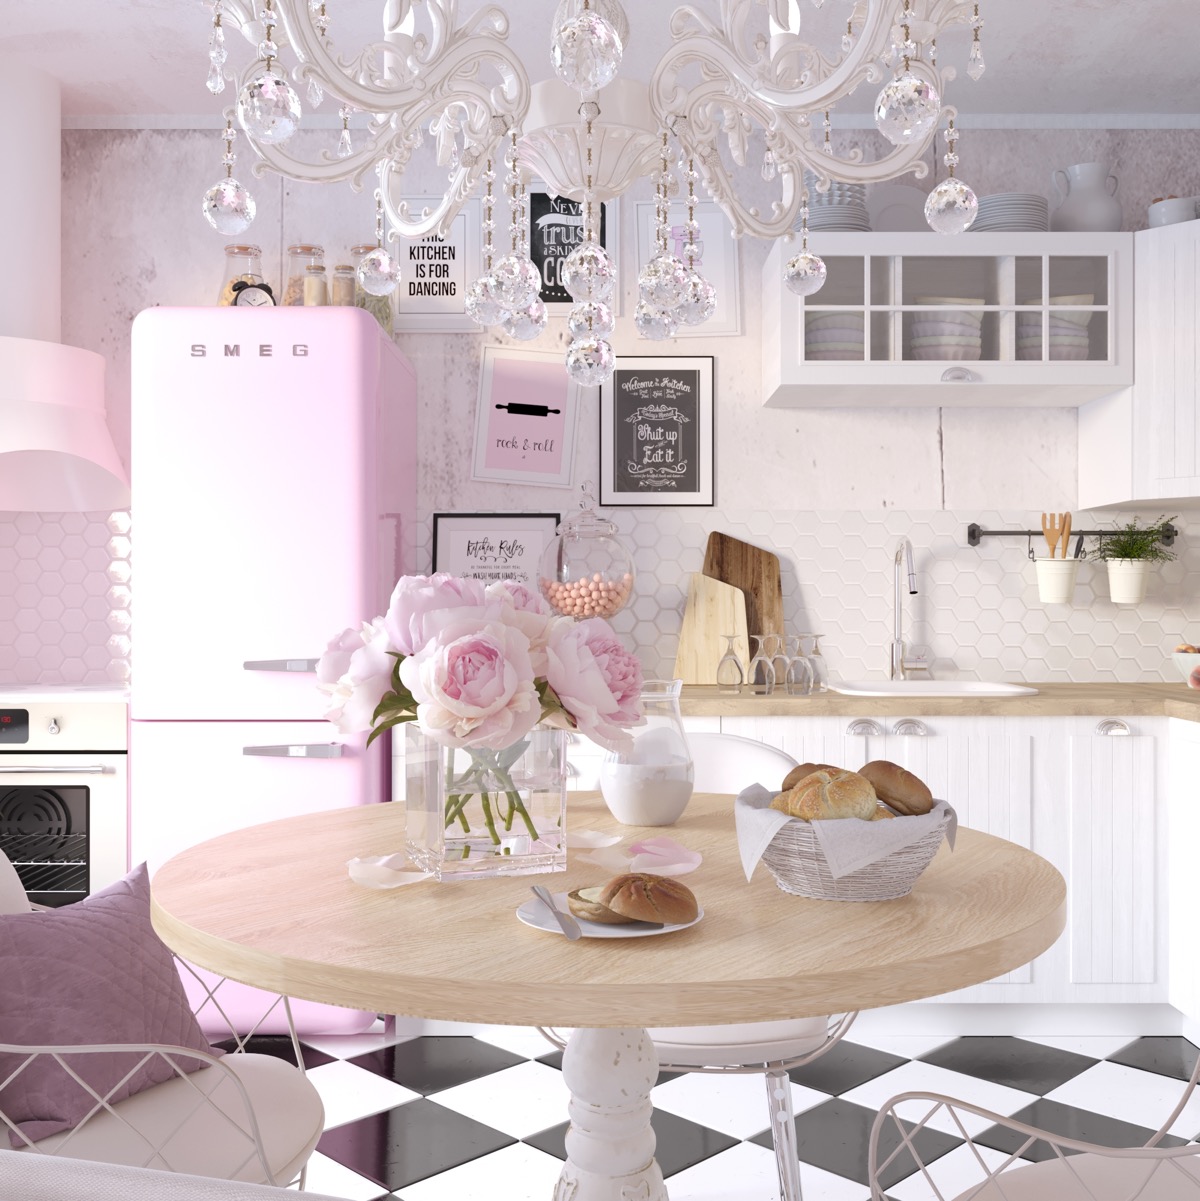 A dusty pink kitchen with a hint of retro